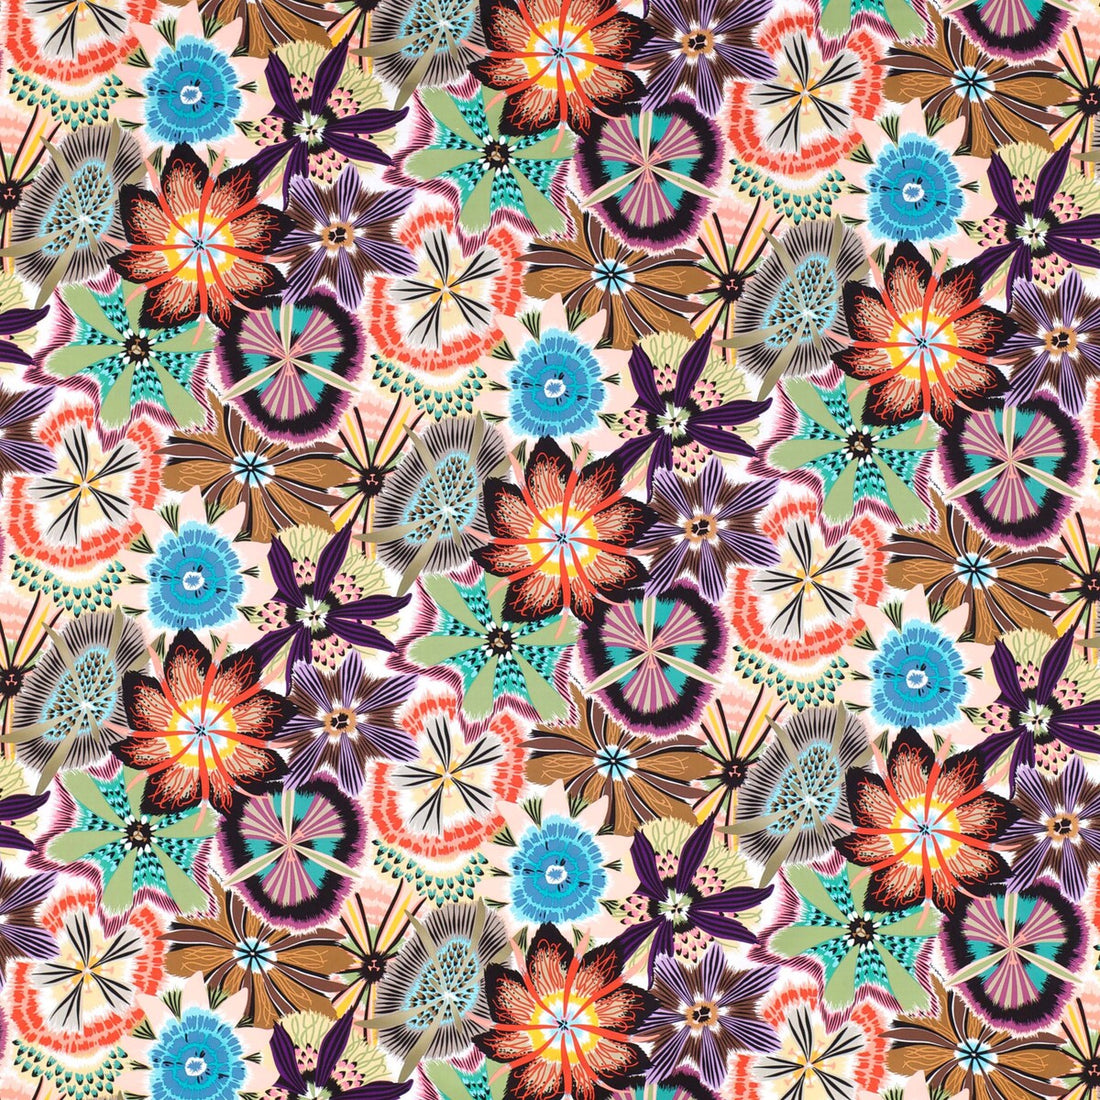 Passiflora fabric in t59 color - pattern 36181.510.0 - by Kravet Couture in the Missoni Home collection